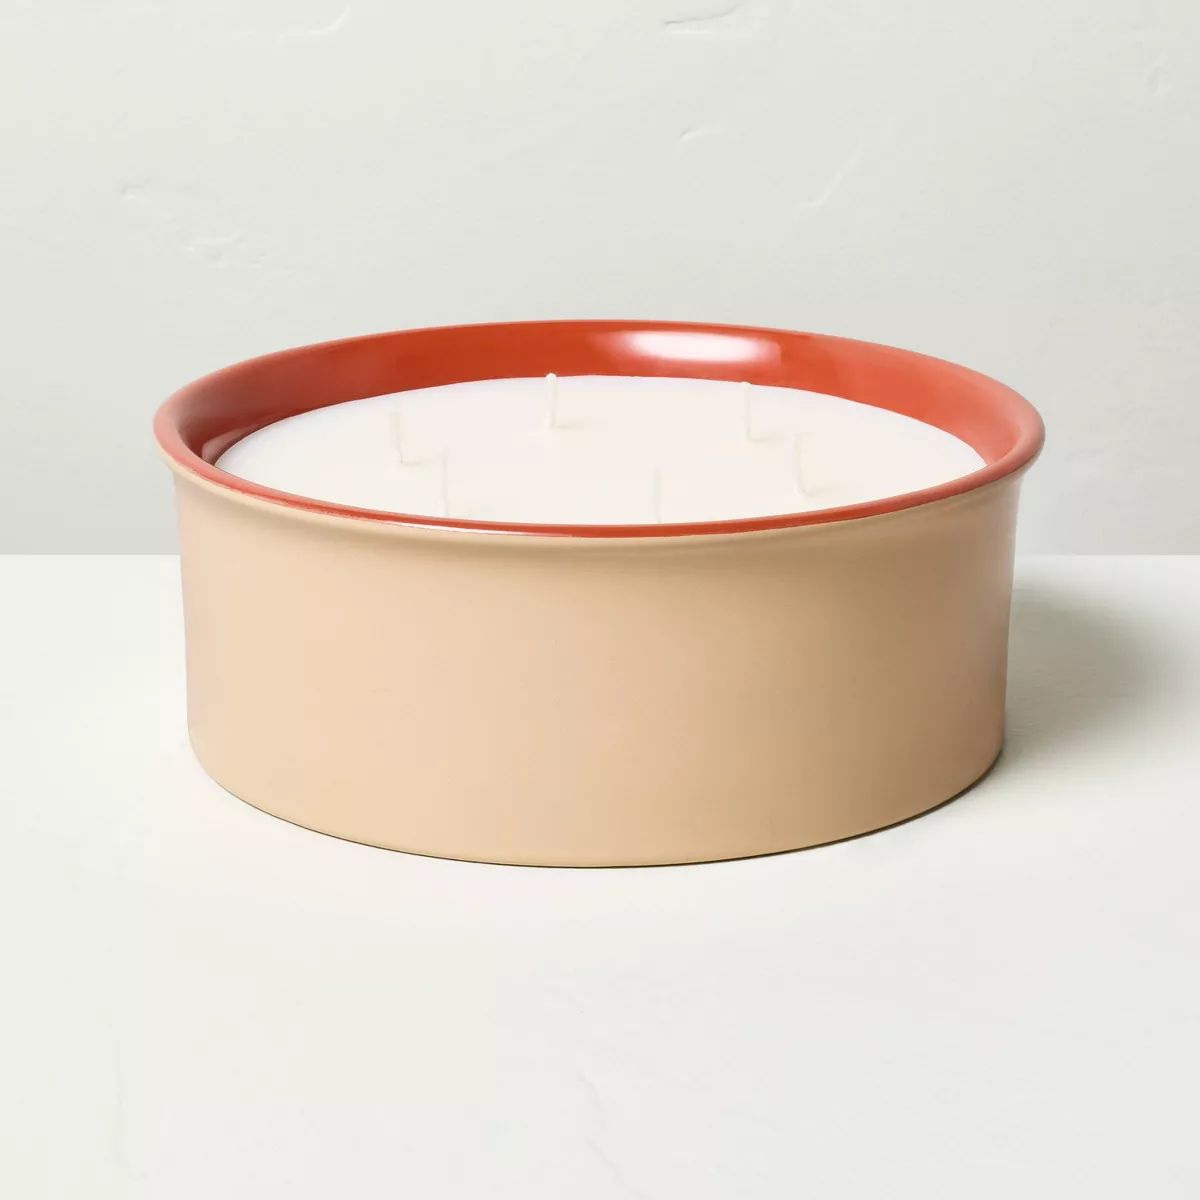 Two-Tone Ceramic Sunkissed Ginger Jar Candle Tan/Red - Hearth & Hand™ with Magnolia | Target